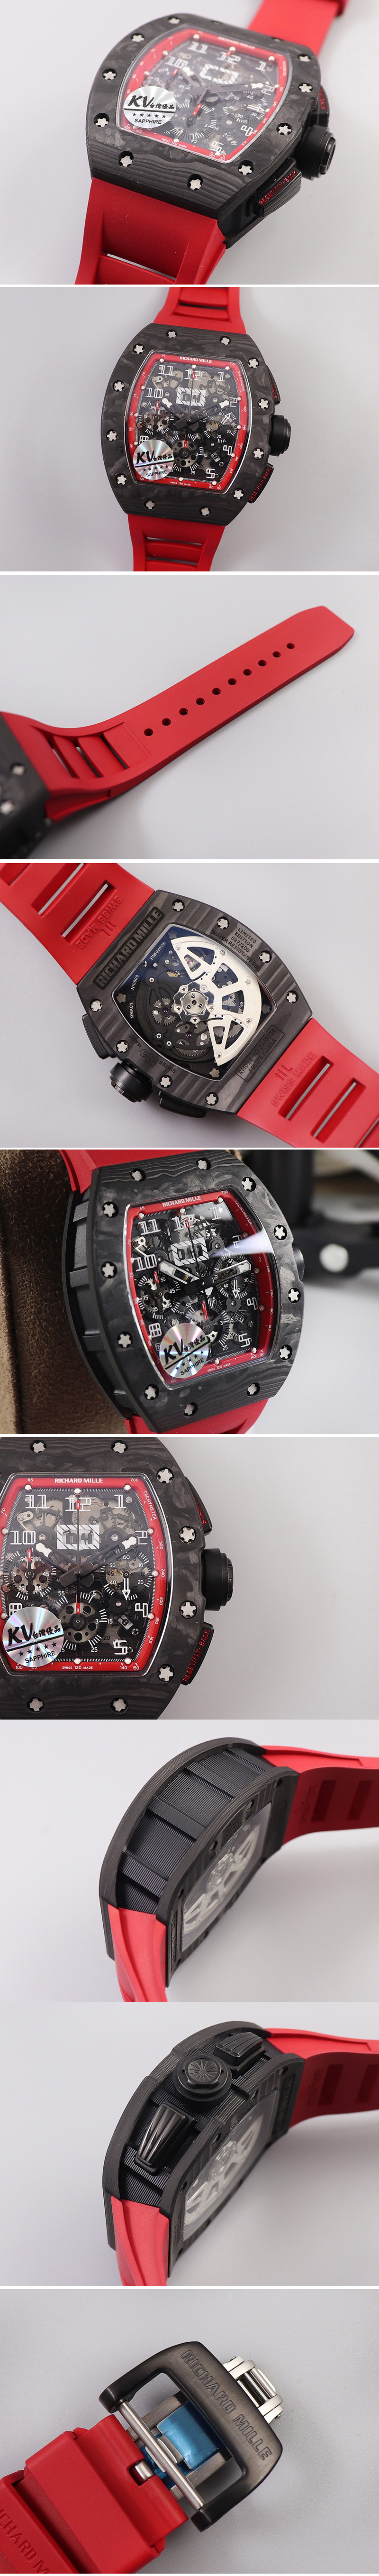 Replica Richard Mille RM011 NTPT Chrono PVD Case KVF 1:1 Best Edition Crystal Dial Red on Red Rubber Strap A7750